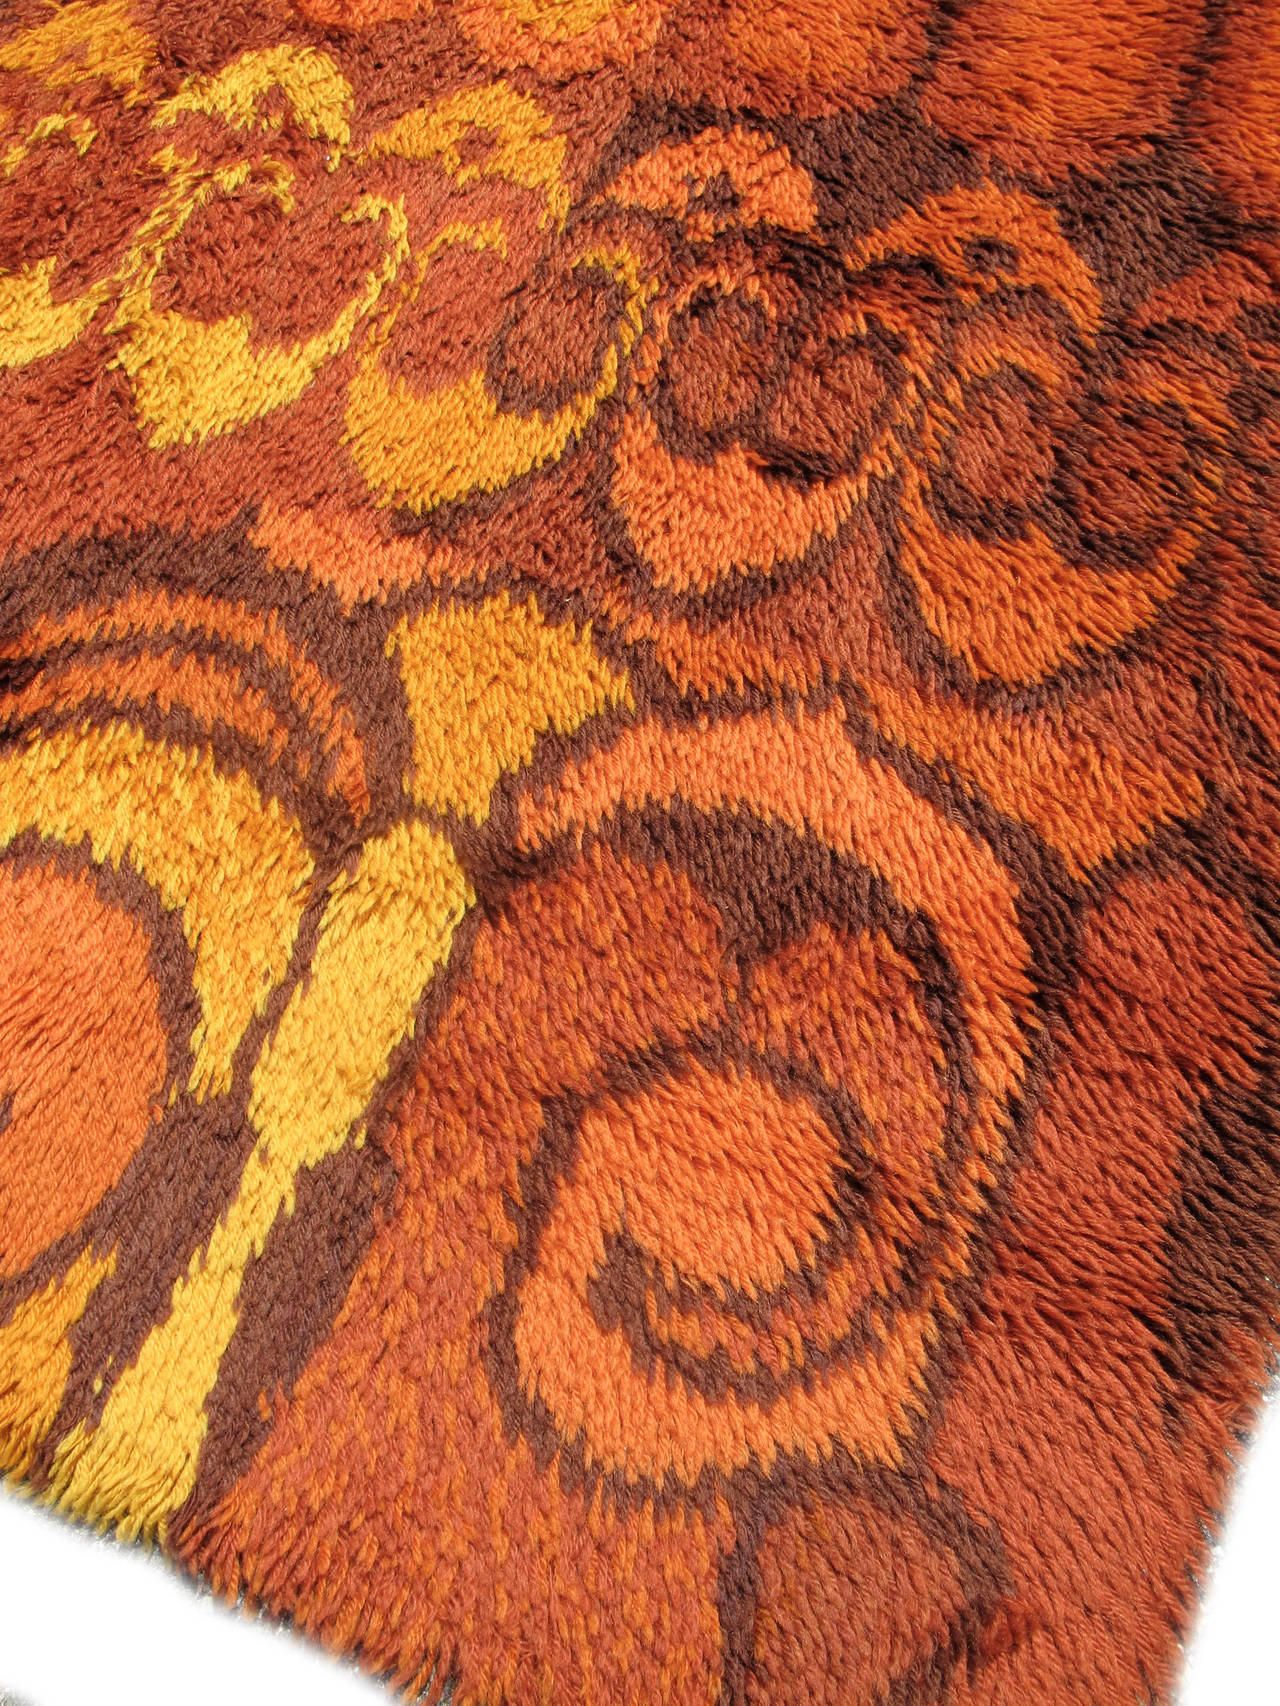 This fantastically chic Scandinavian piece reflects the modernist aesthetics of the late 1960s and early 1970s. Woven with autumnal colors of golds and rusts, repeat forms derived from earlier Art Nouveau vegetal design are repeated to form an